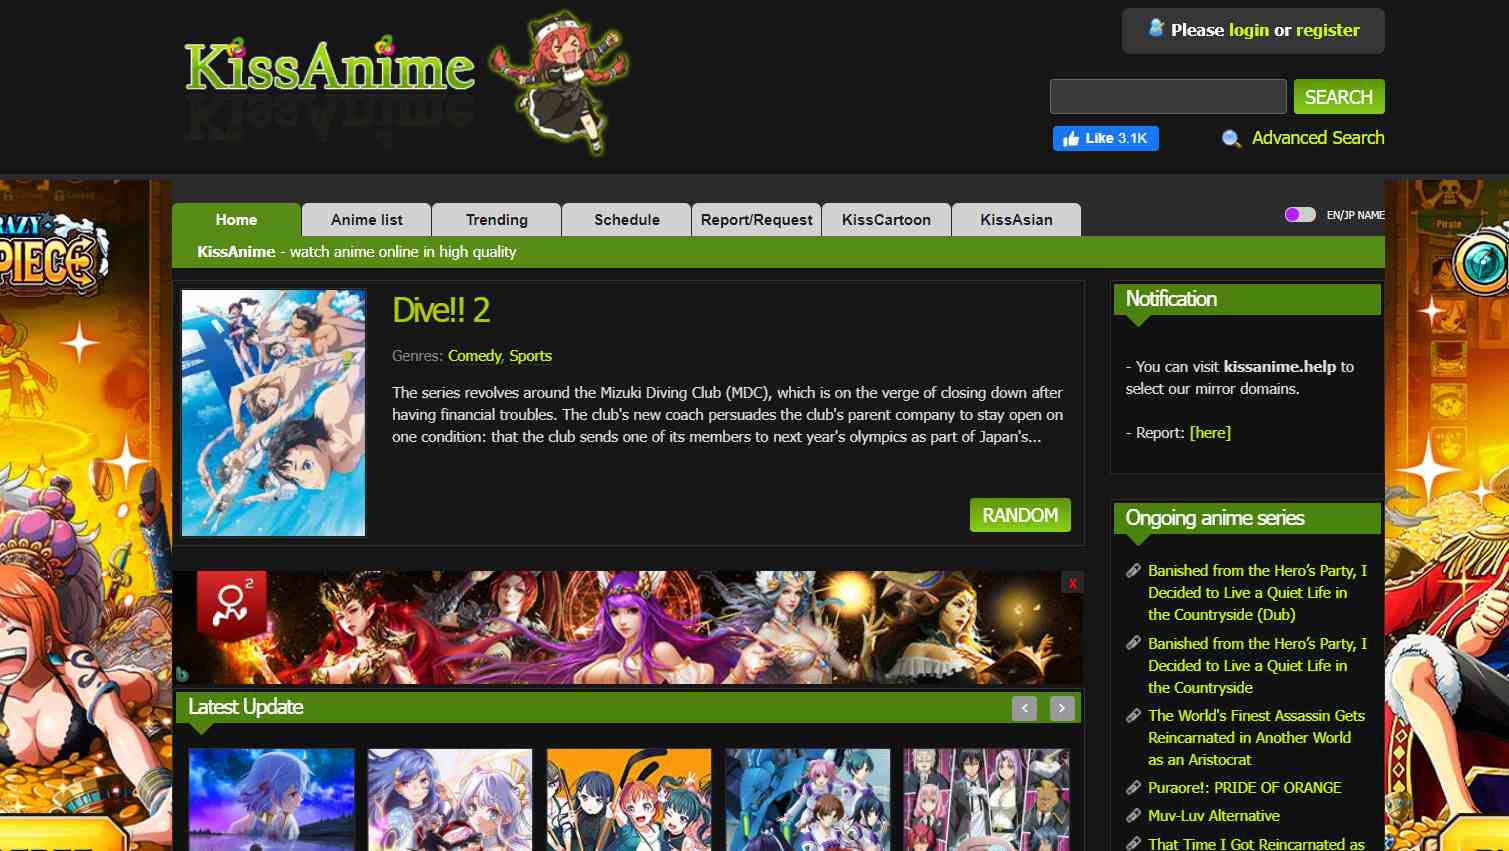 Easiest Steps To Download From KissAnime From PC?